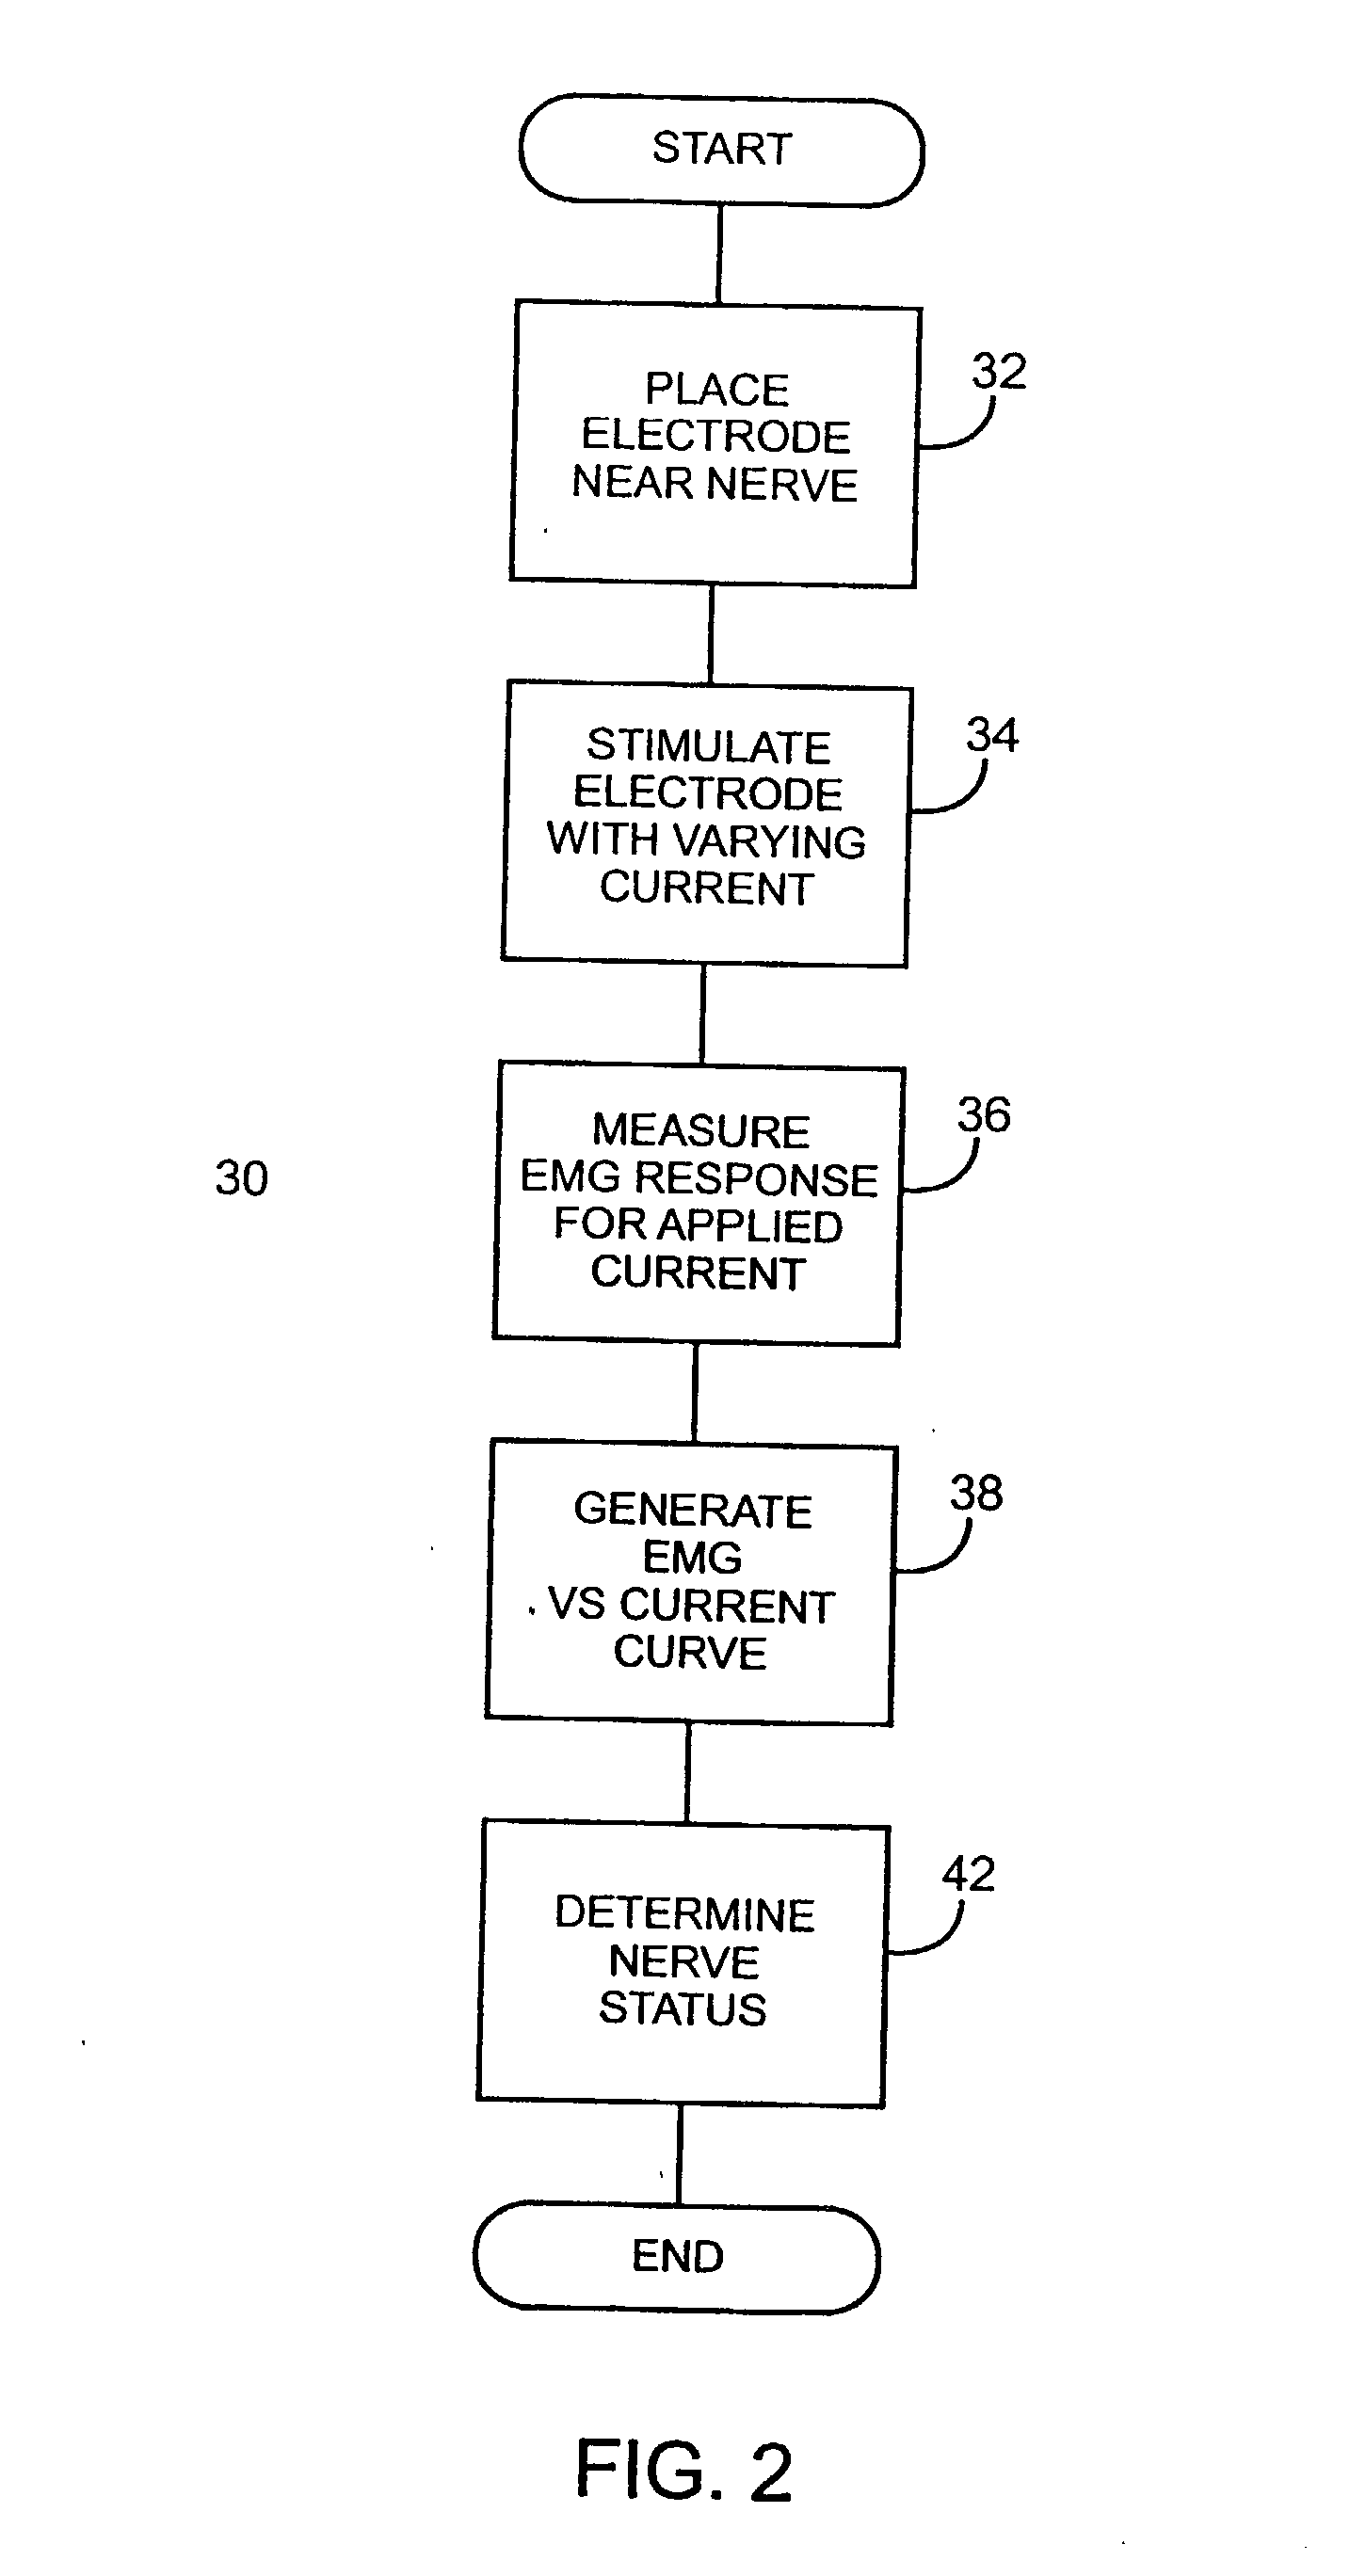 Nerve proximity and status detection system and method